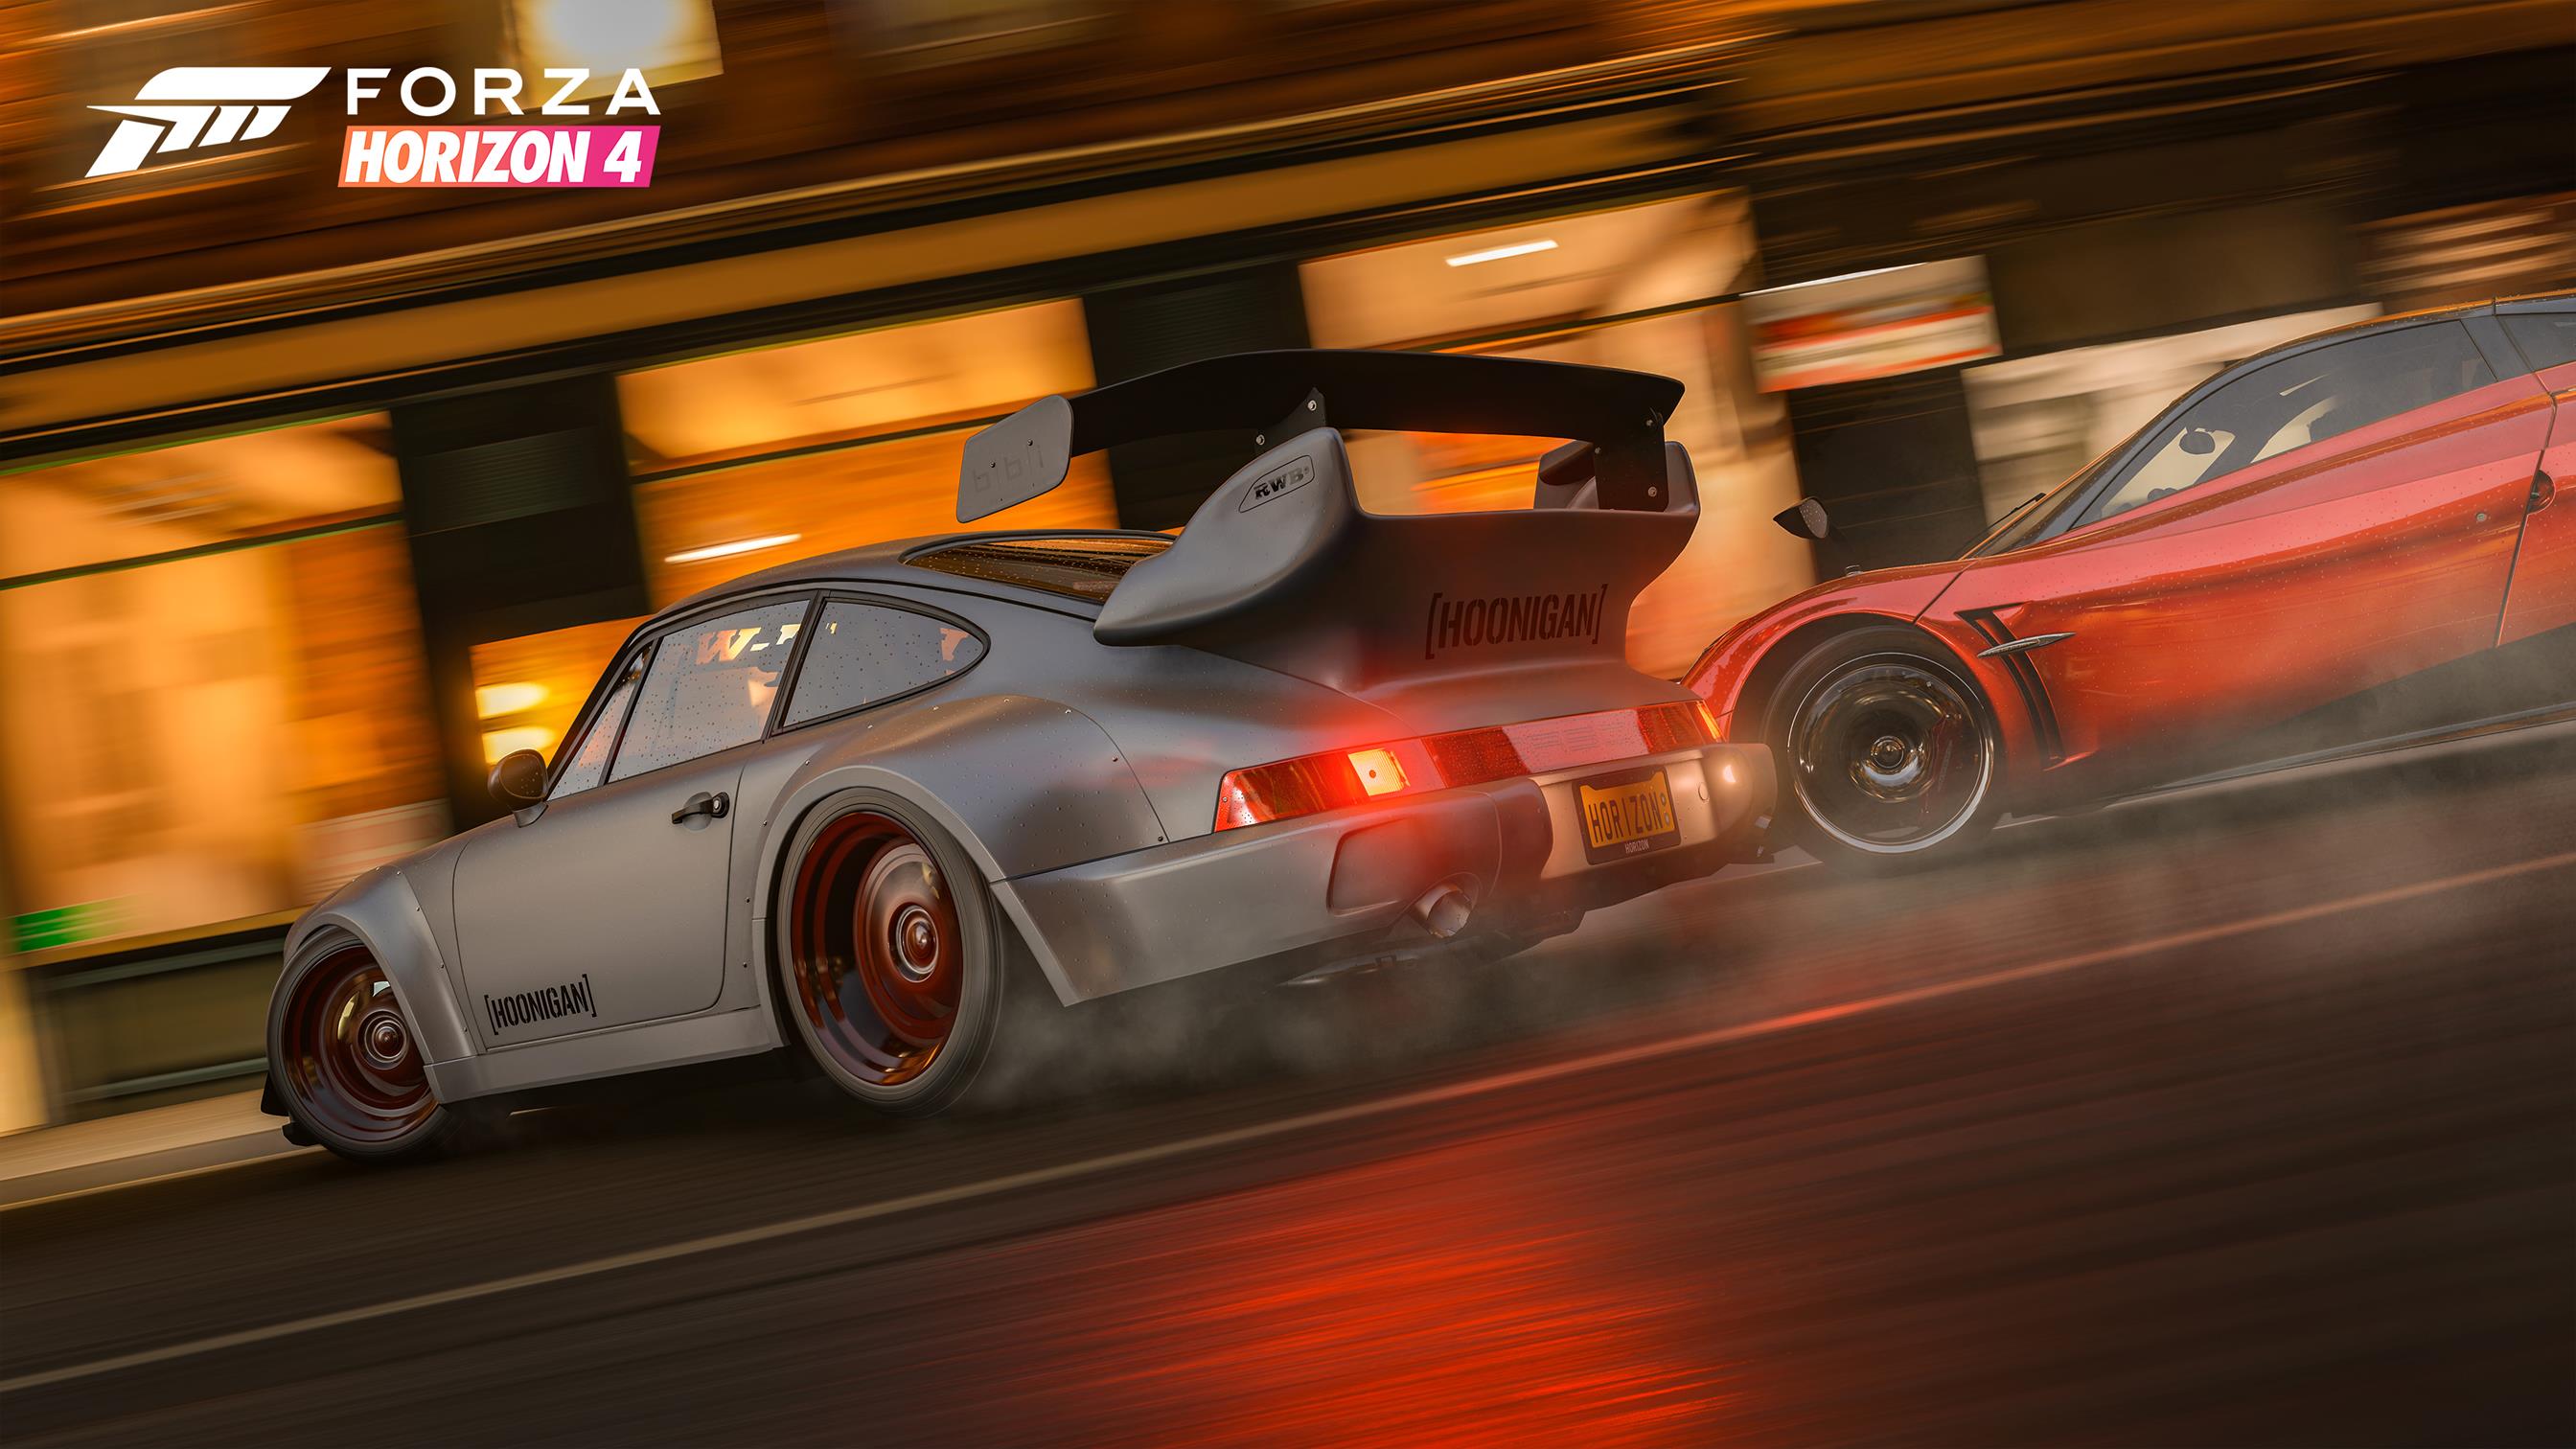 Image for Forza Horizon 4 car list leaks thanks to the Windows Store